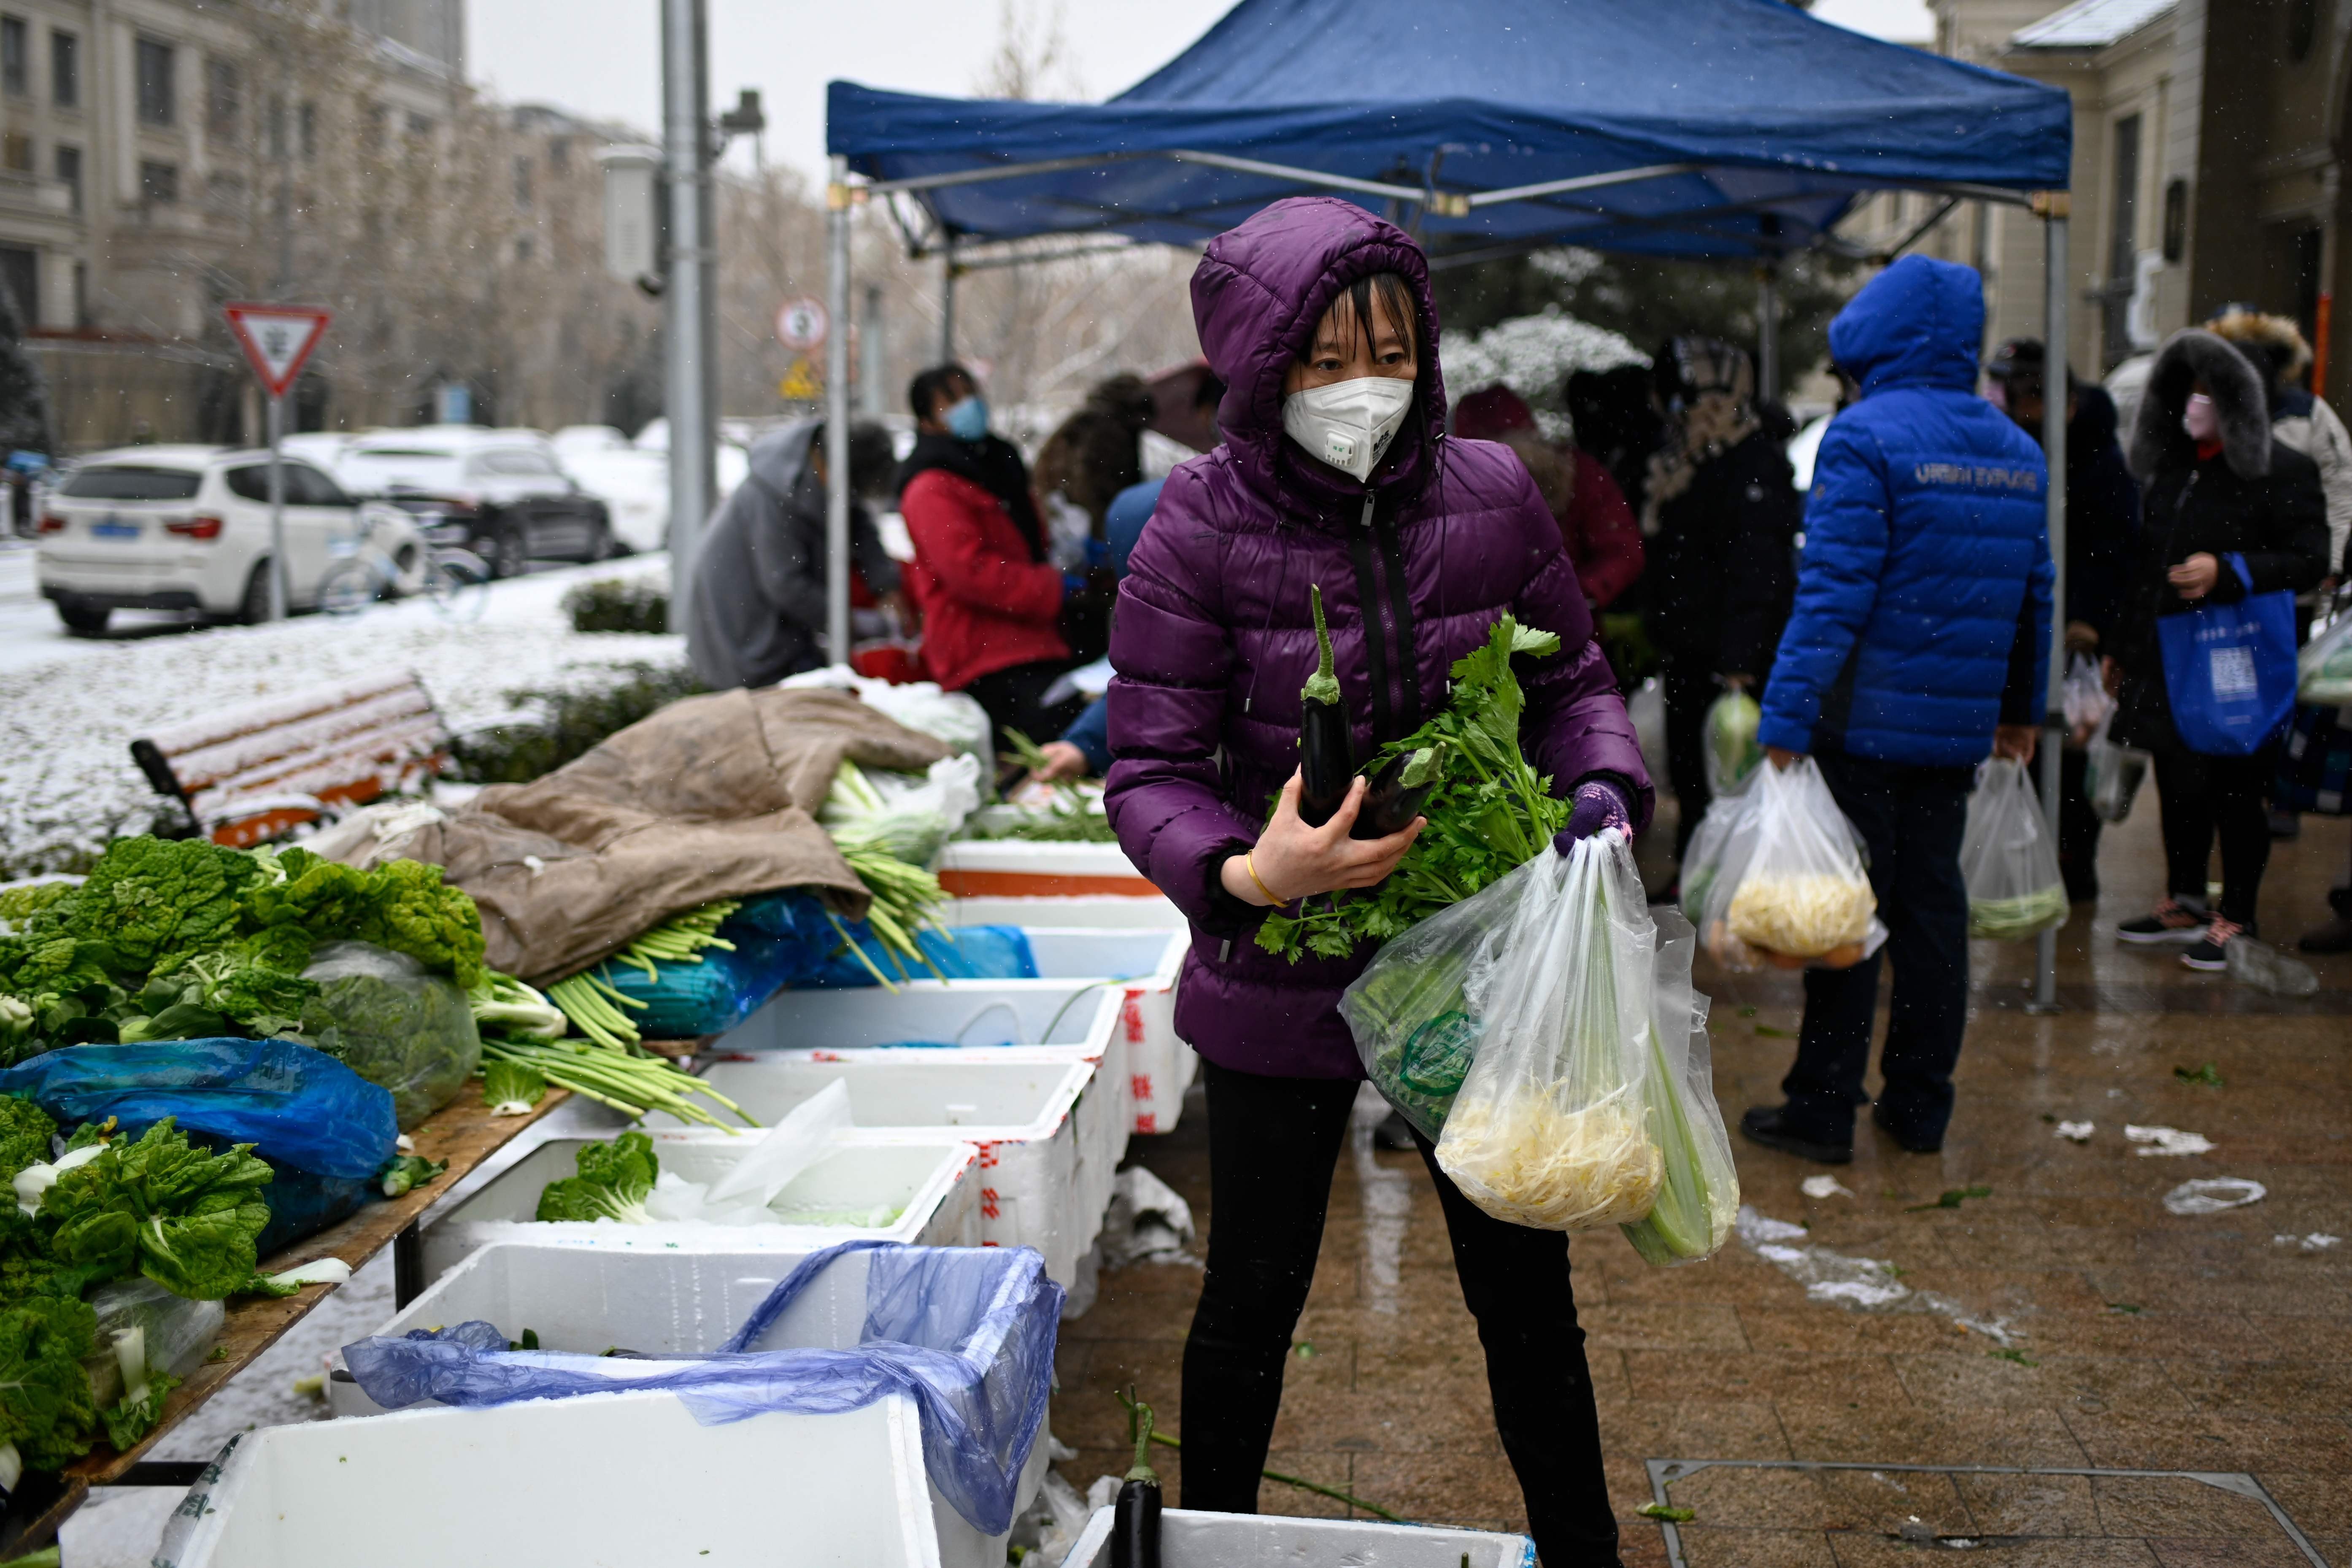 A woman wearing a mask buys vegetables at an open market in Beijing on February 2, after an outbreak of virus similar to the SARS pathogen. Photo: AFP